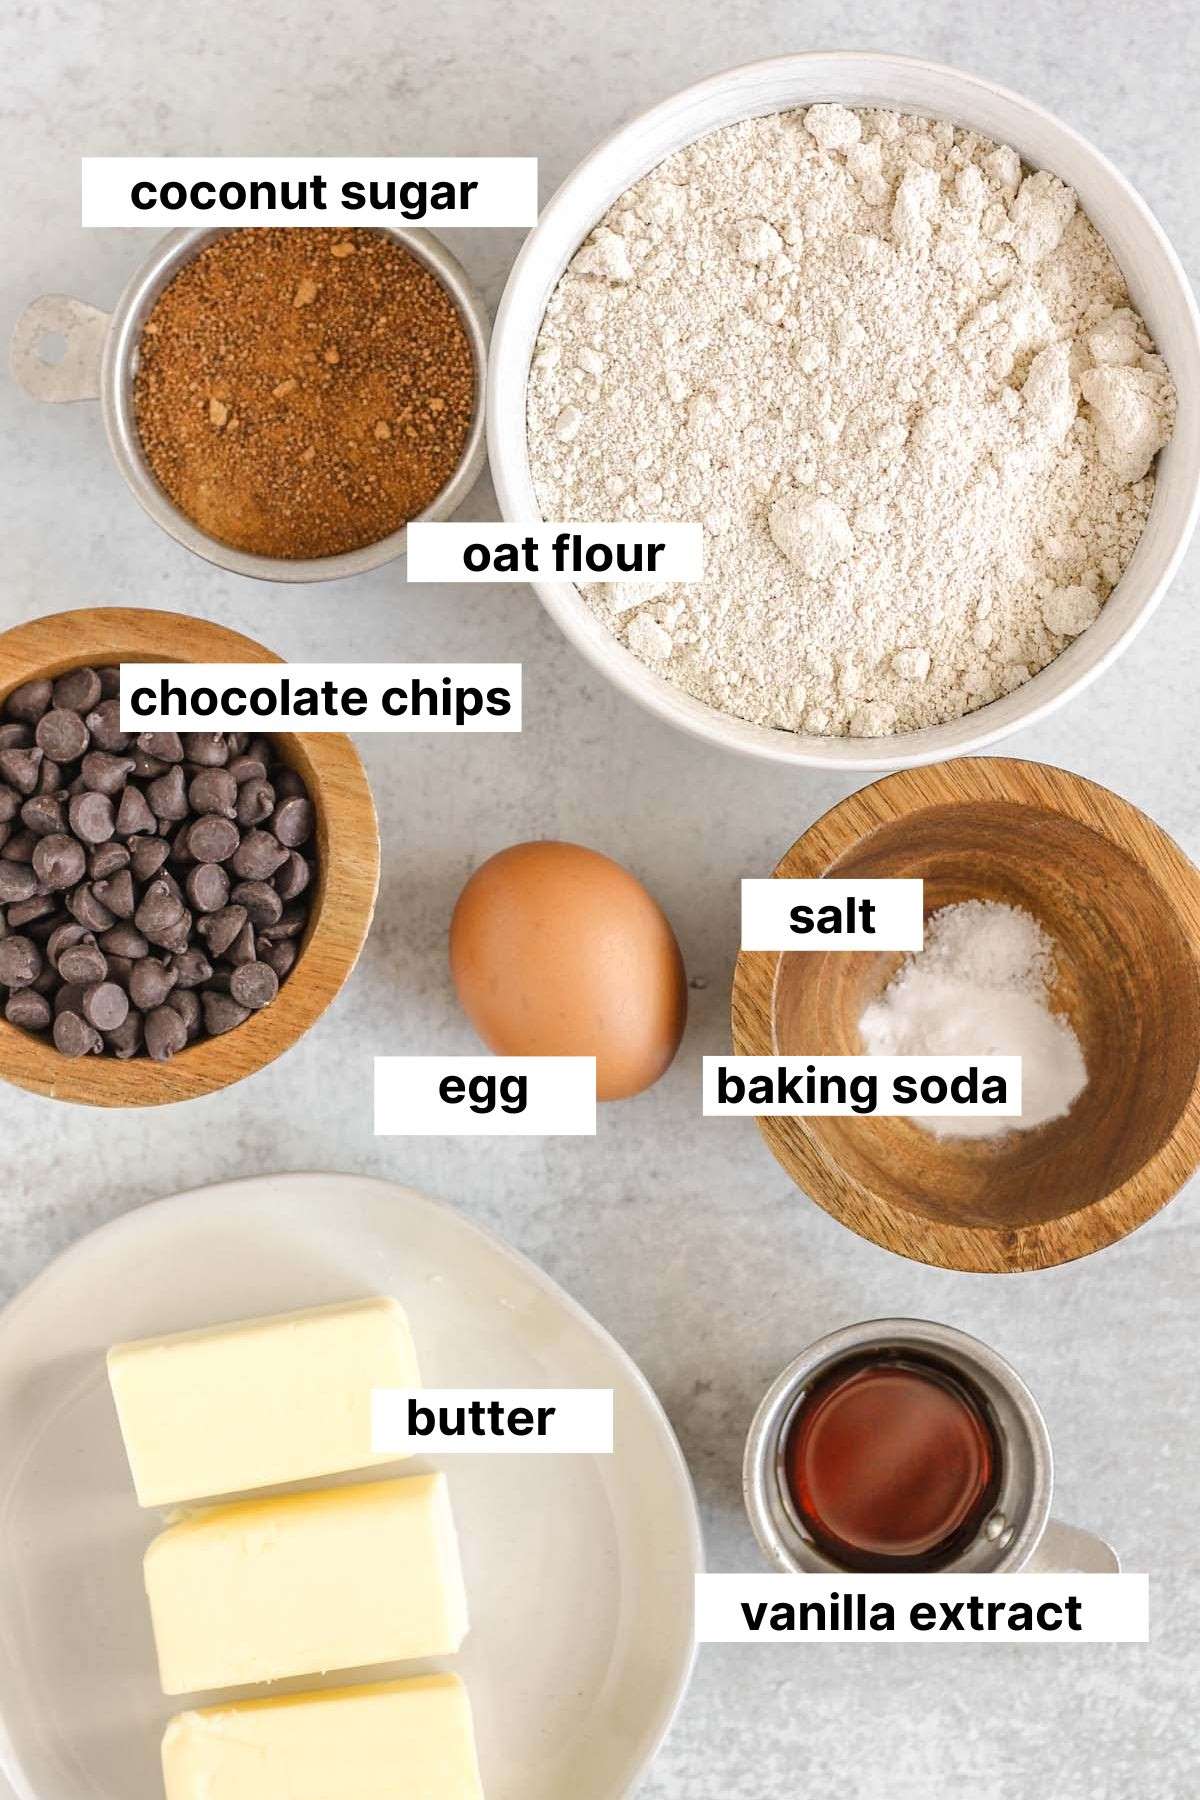 Labeled ingredients for oat flour cookies.